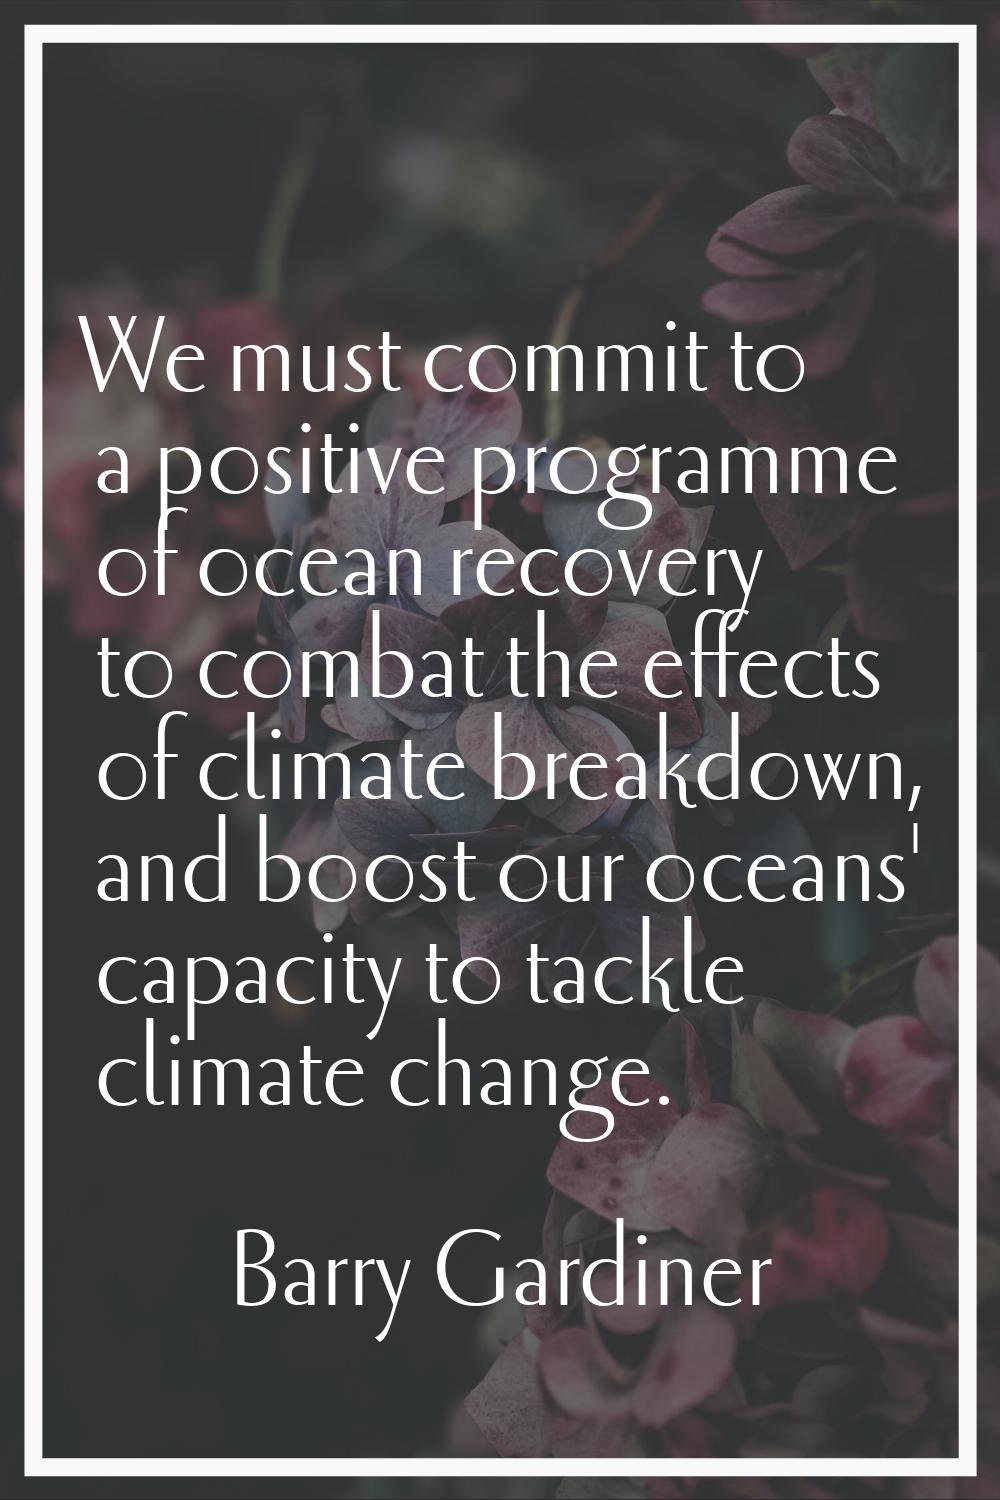 We must commit to a positive programme of ocean recovery to combat the effects of climate breakdown